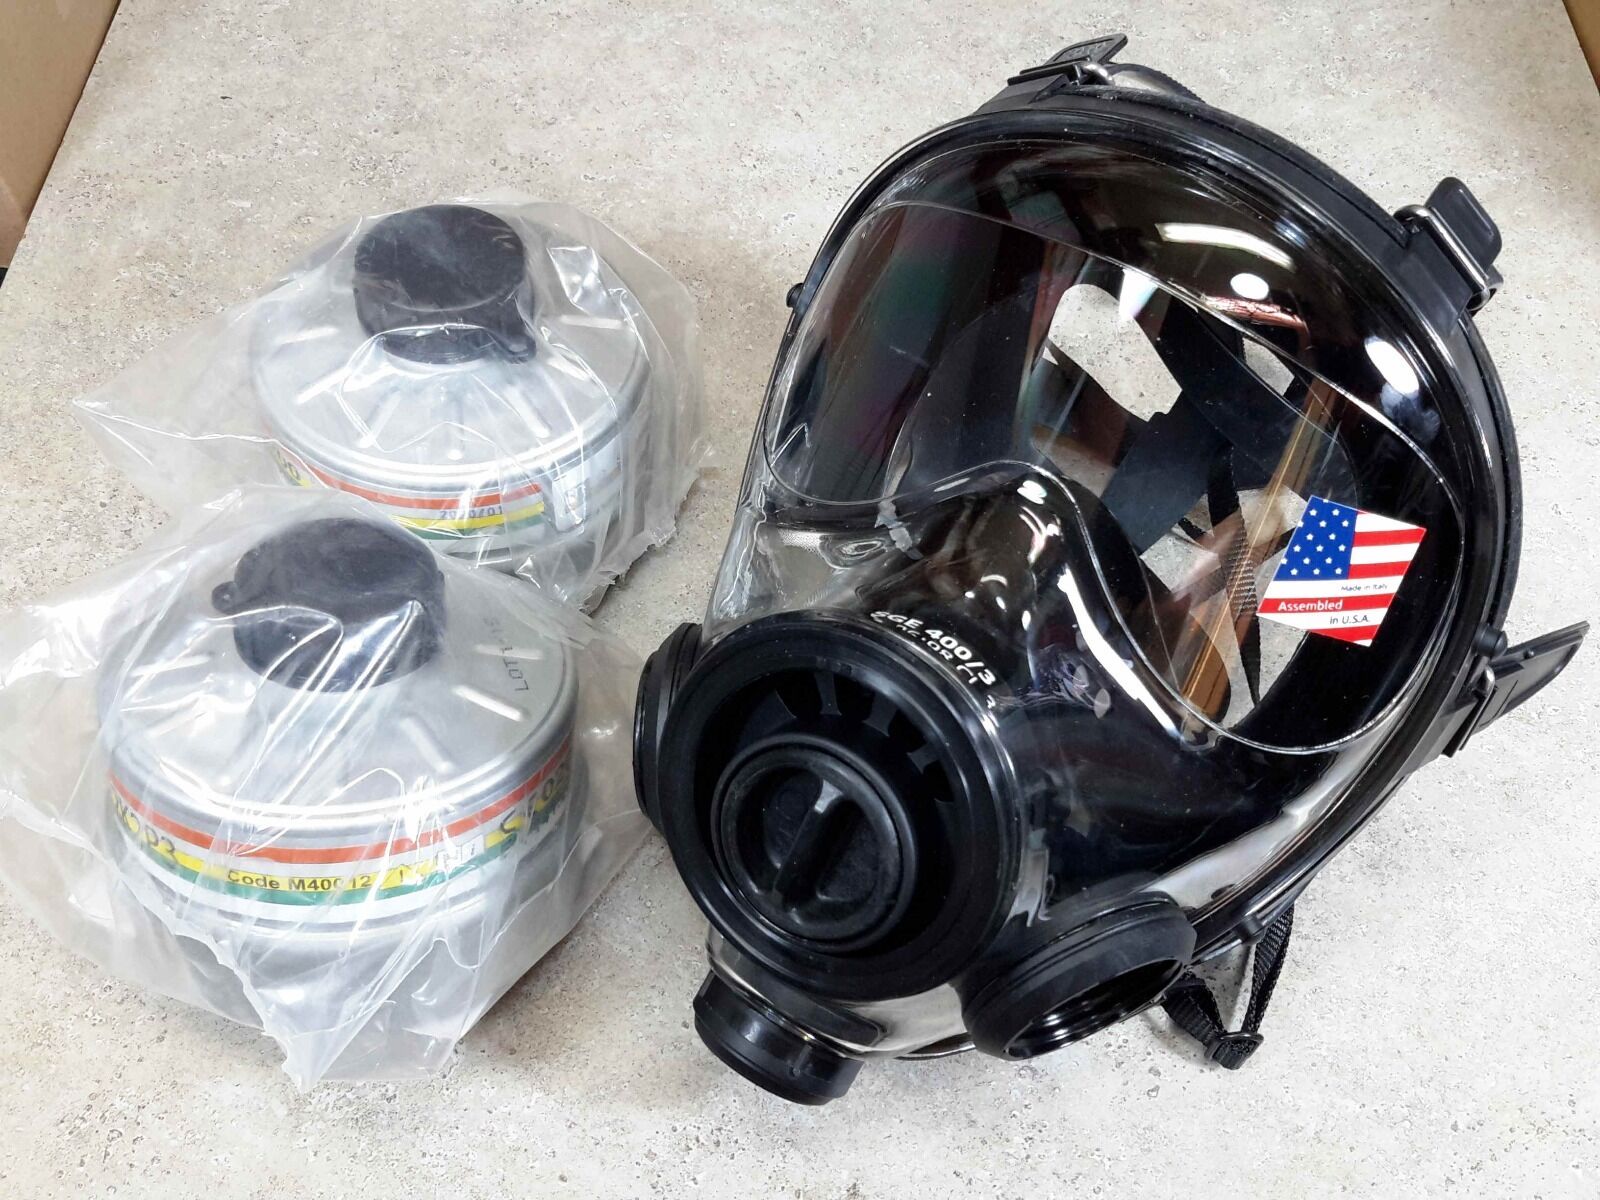 NBC Gas Mask Military-Grade SGE 400/3 Comes with TWO 40mm NATO CBRN Filters, NIB